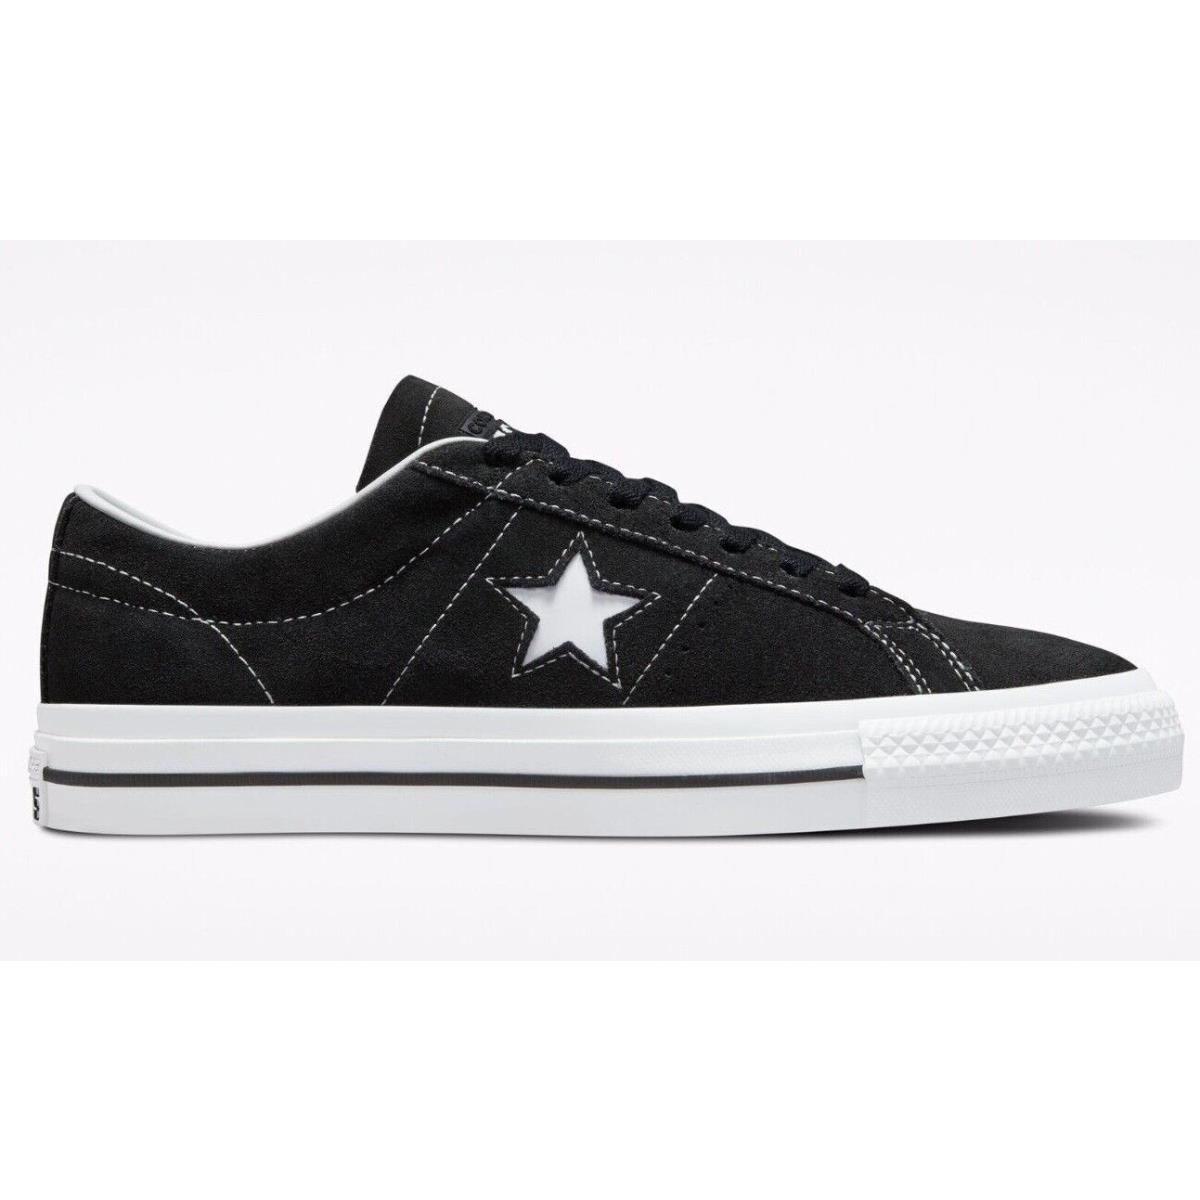 Converse One Star Pro Limited Edition Suede Low Top Men`s Shoes Foam Cushioning Black/Black/White